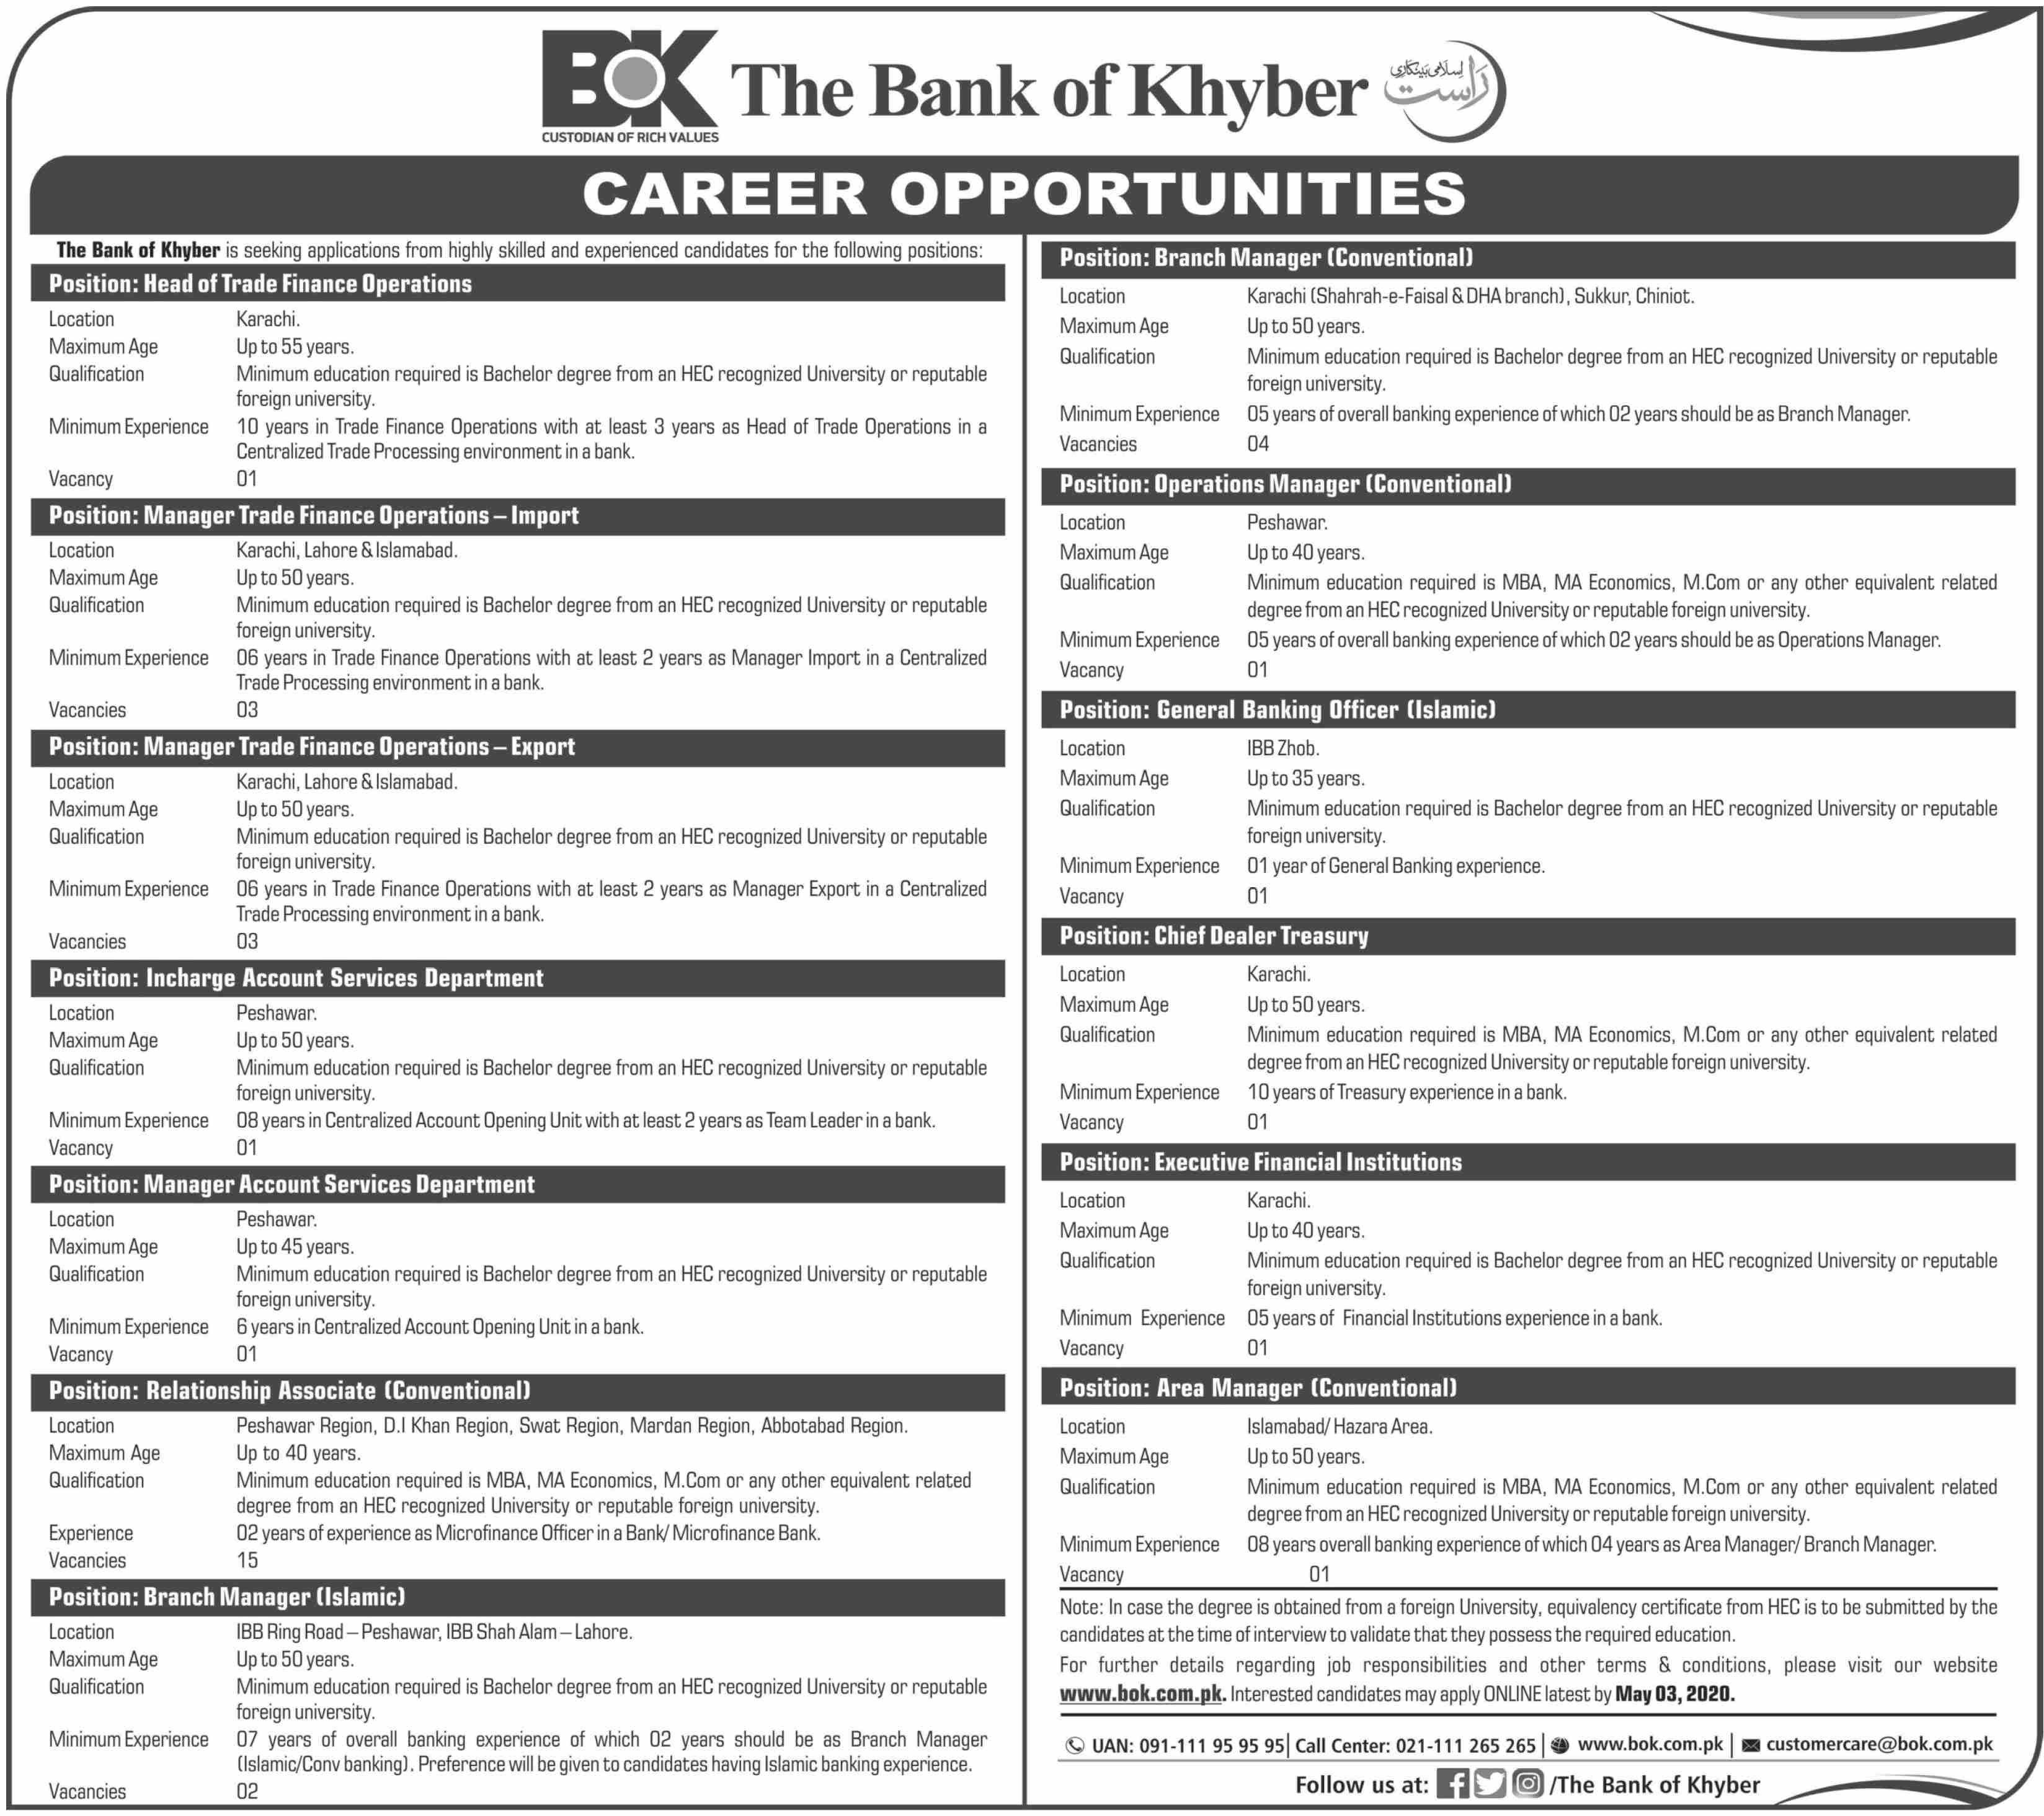 Bank of Khyber announces jobs in multiple cities